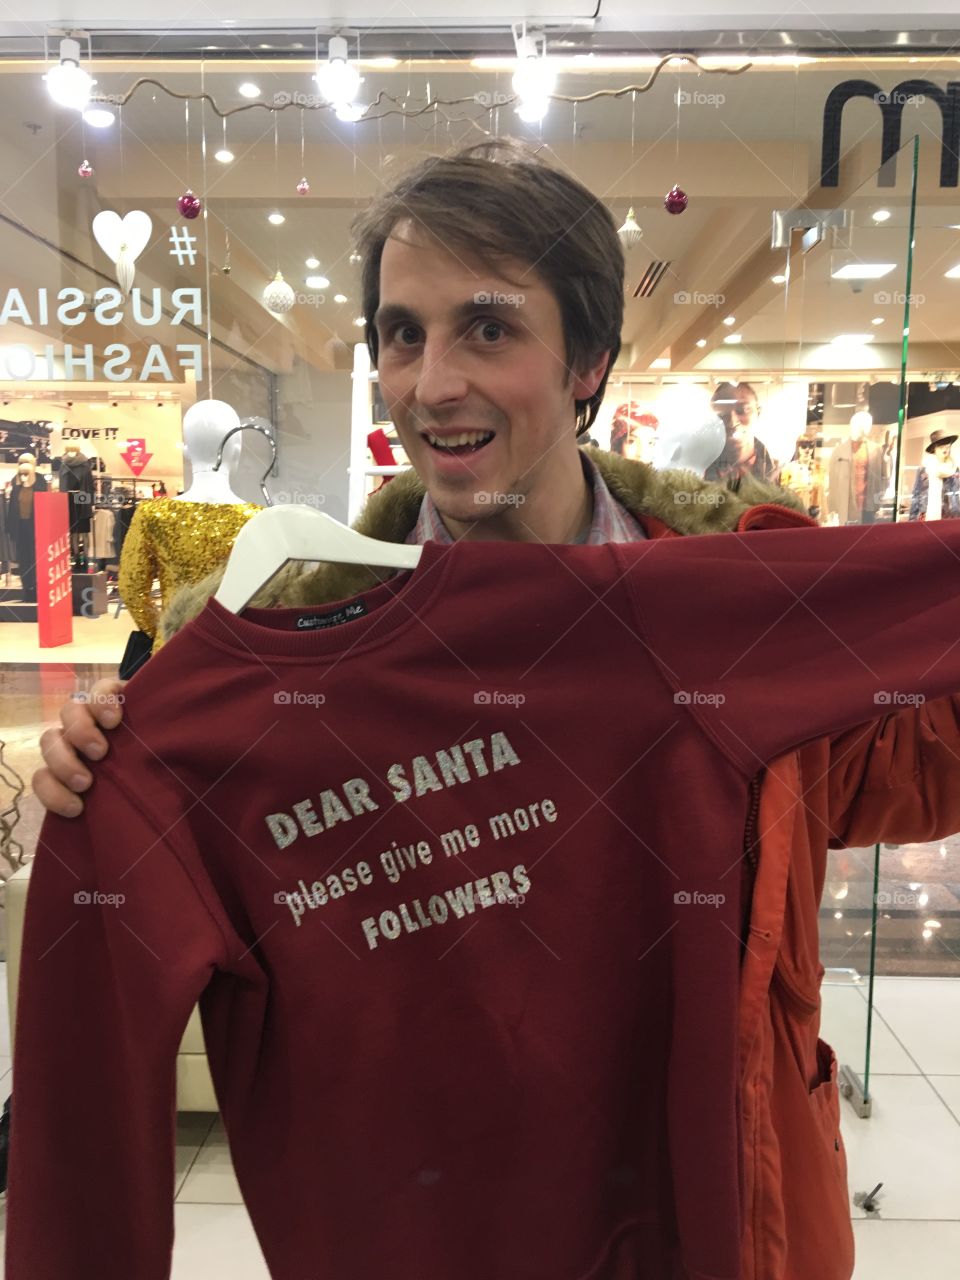 Man in store smiling and trying sweatshirt with words about more likes and followers for christmas 